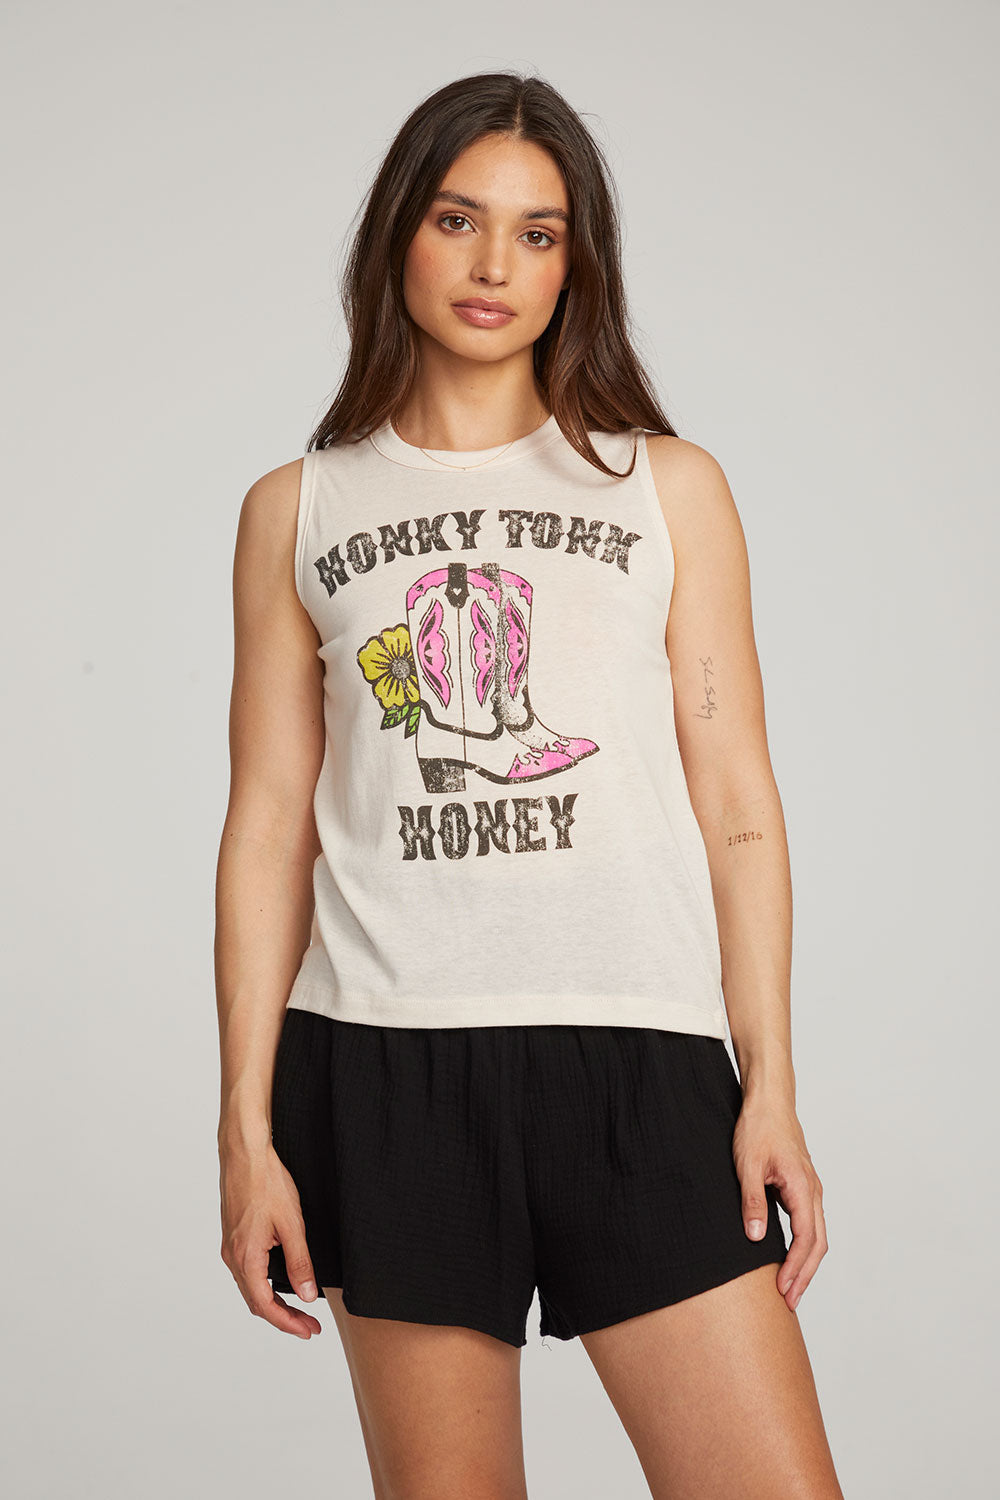 Honky Tonk Honey Muscle Tee WOMENS chaserbrand